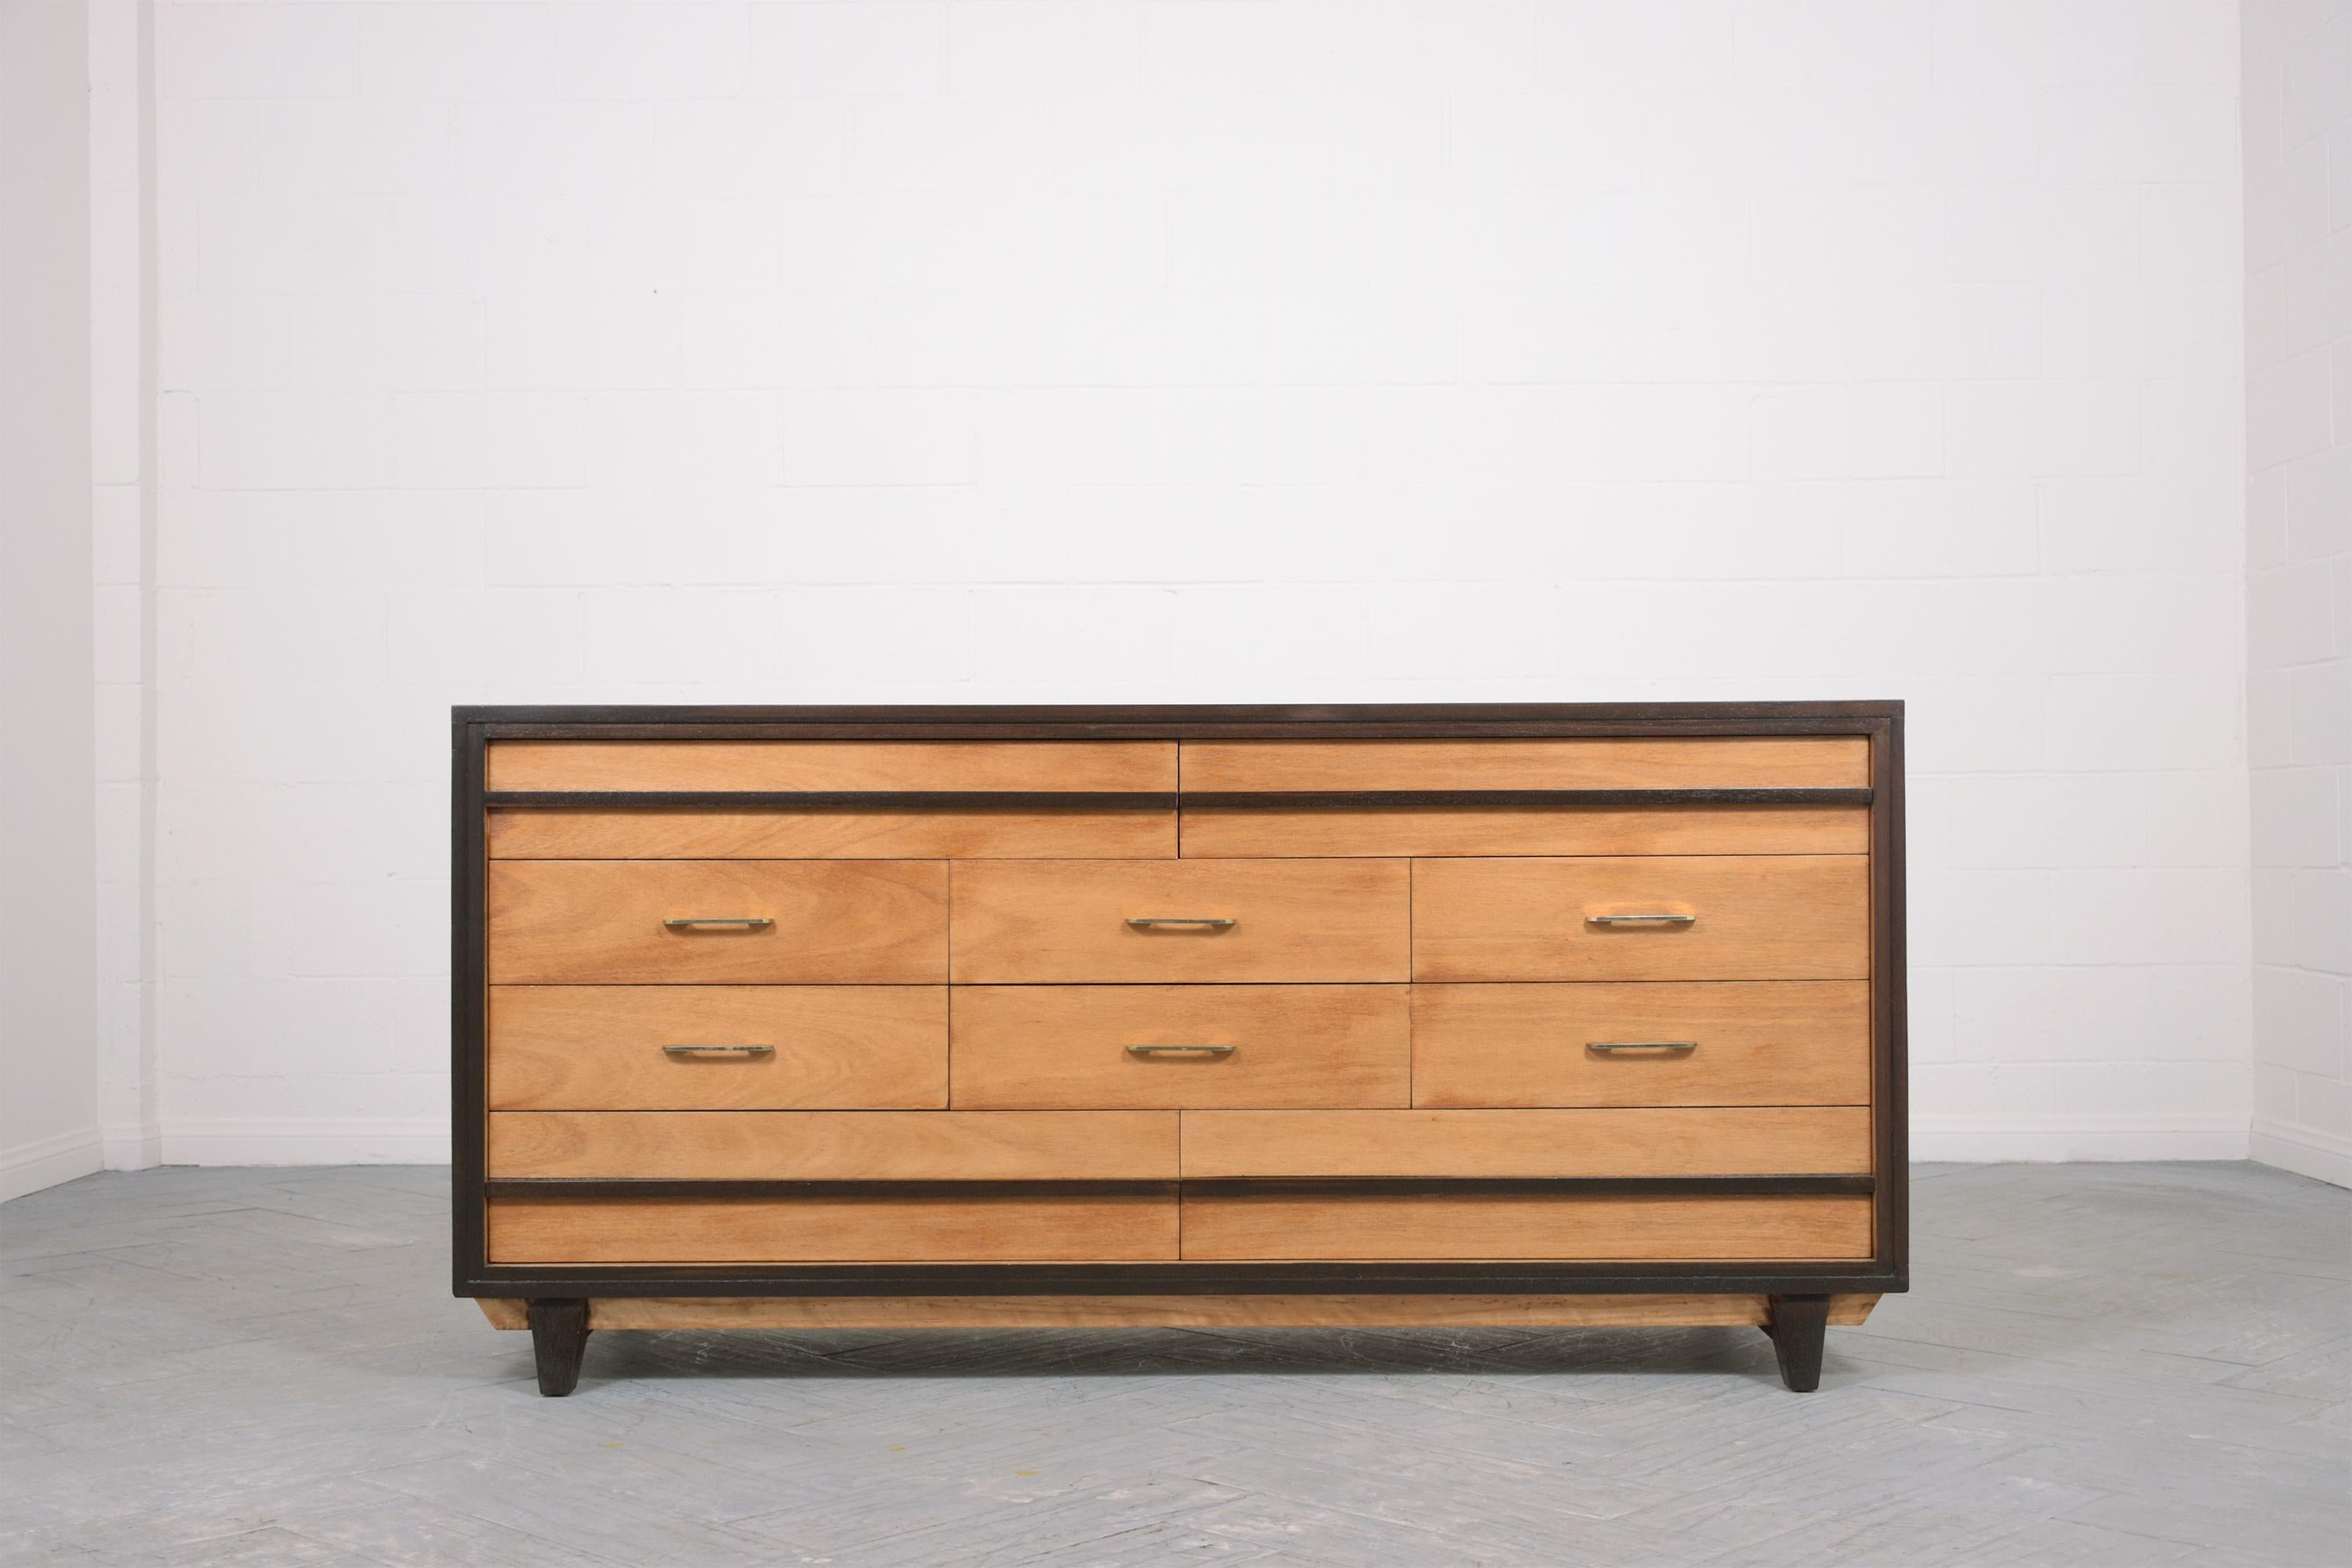 Elevate your interior decor with our stunning vintage mid-century modern walnut chest of drawers. This piece has been meticulously handcrafted from high-quality walnut wood and is in great condition, having been fully restored by our team of